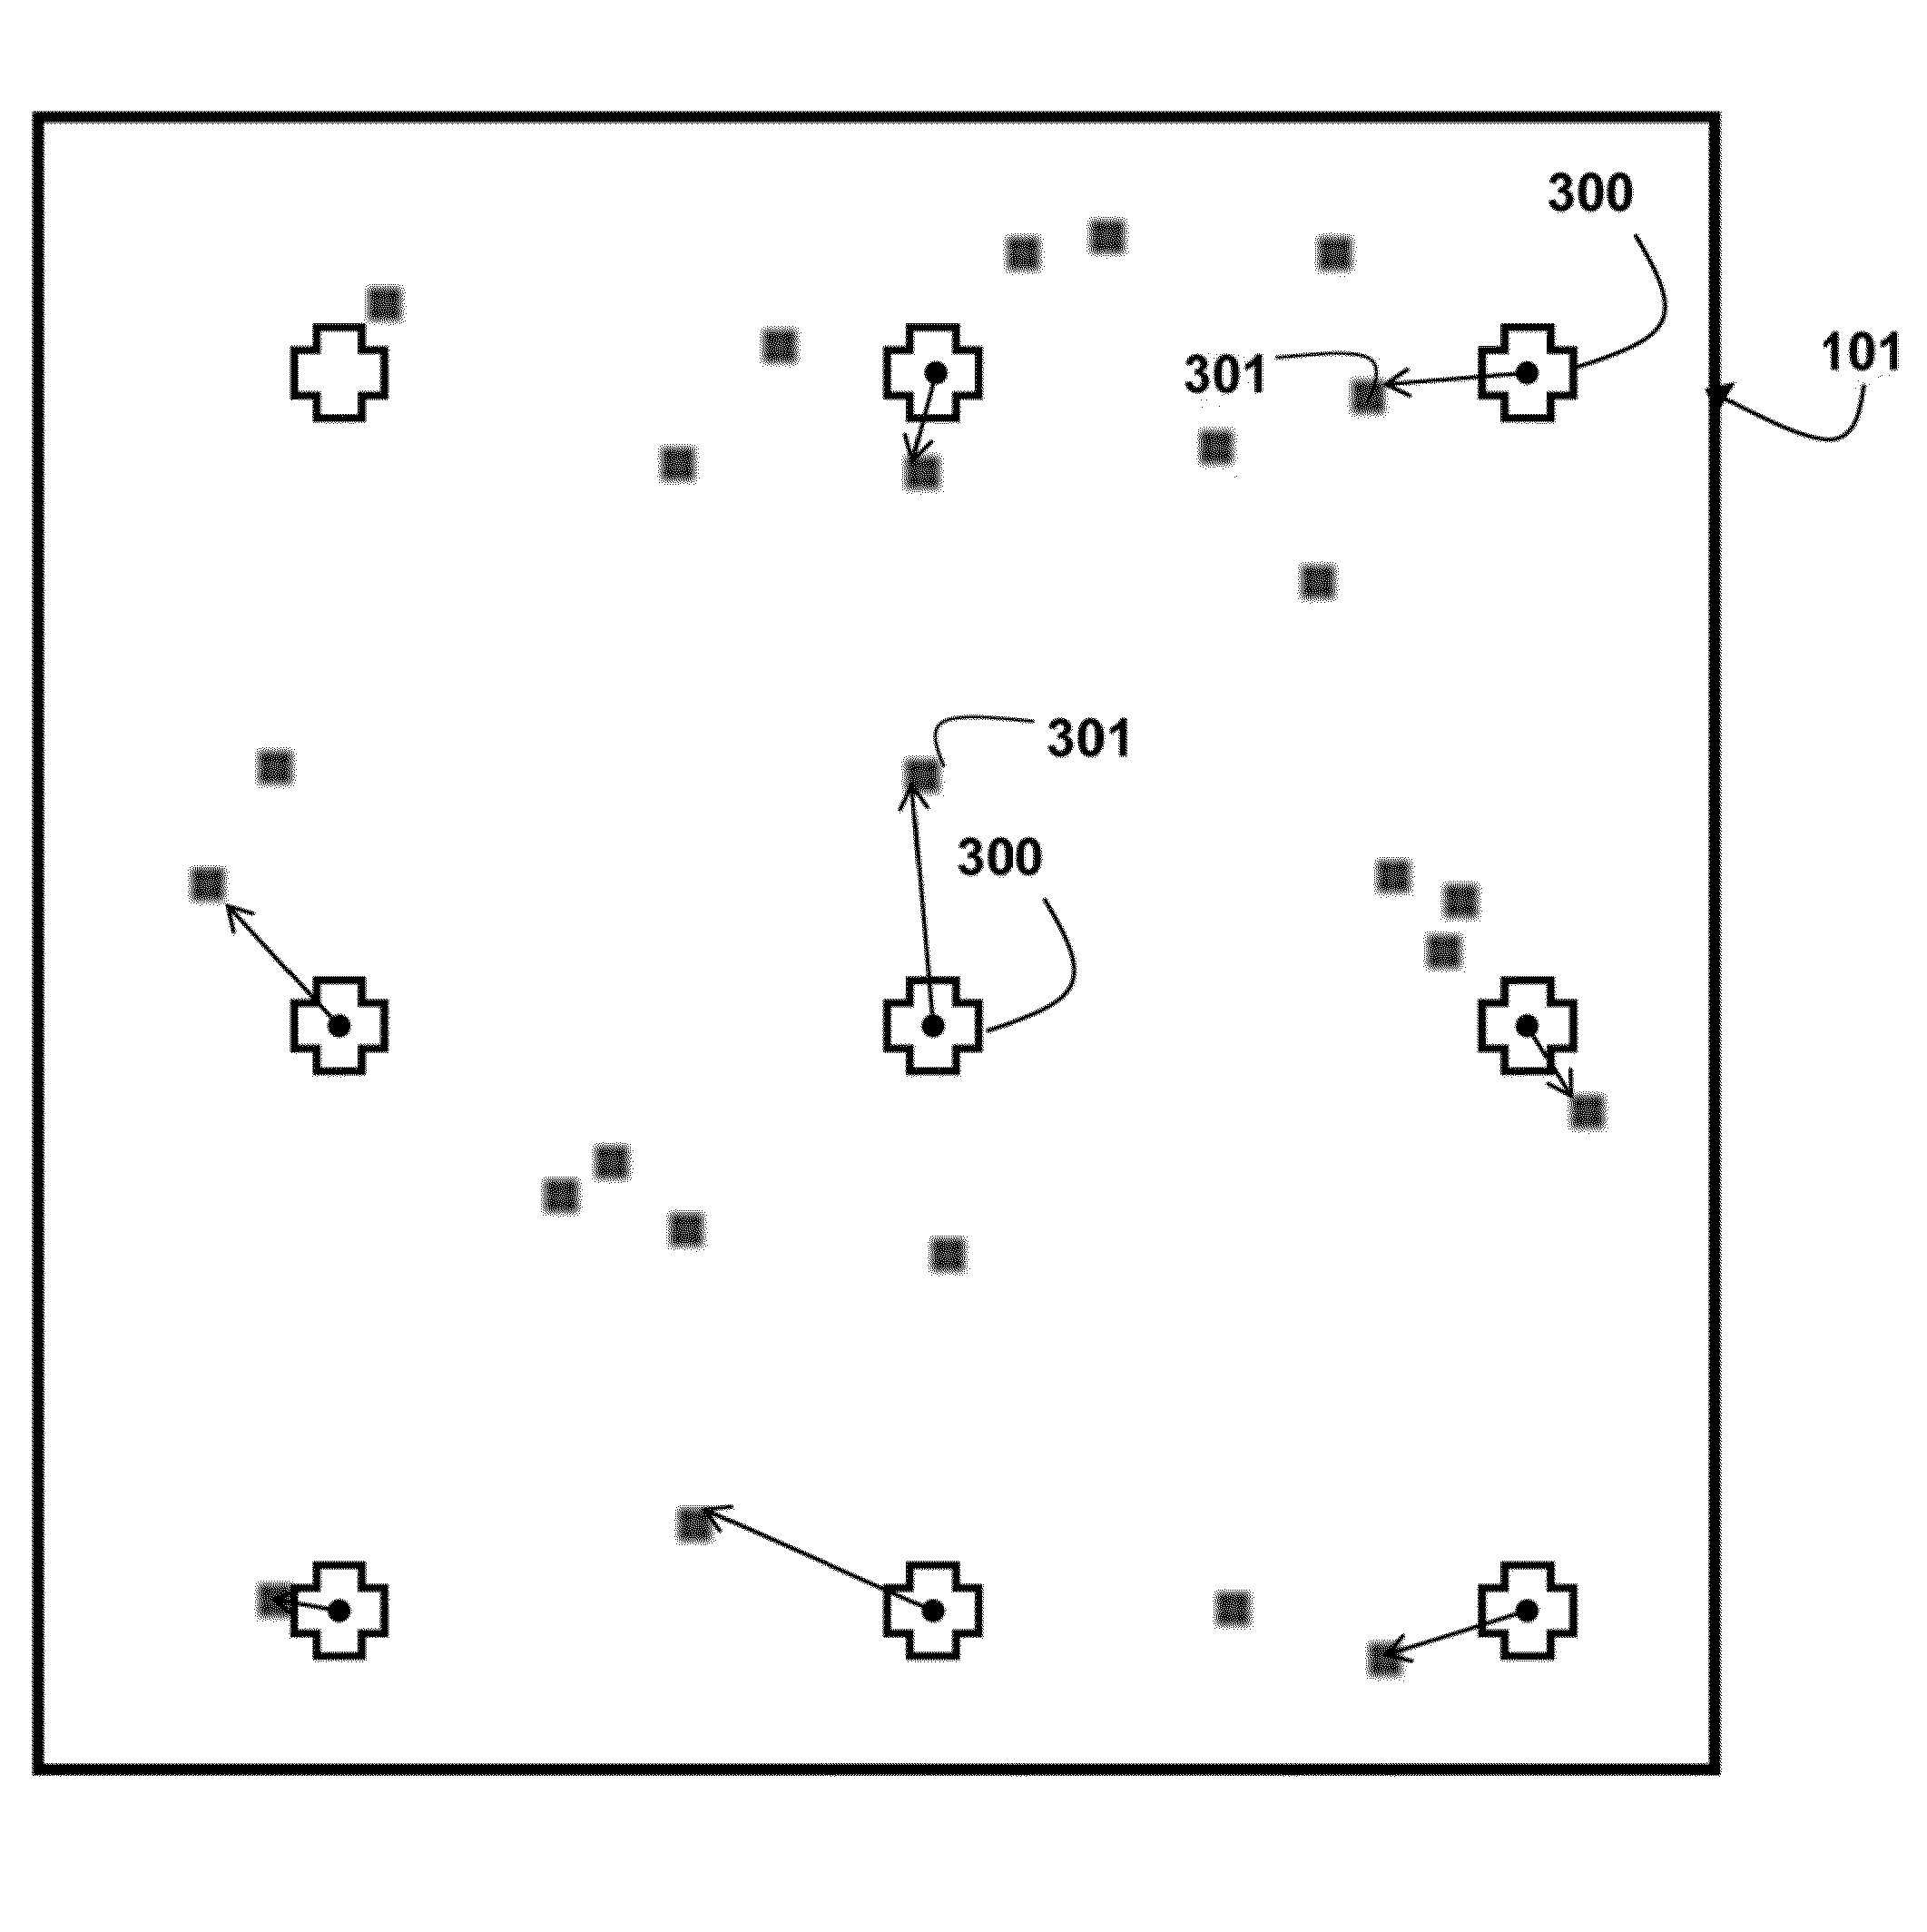 Method for Determining a Sequence for Drilling Holes According to a Pattern using Global and Local Optimization